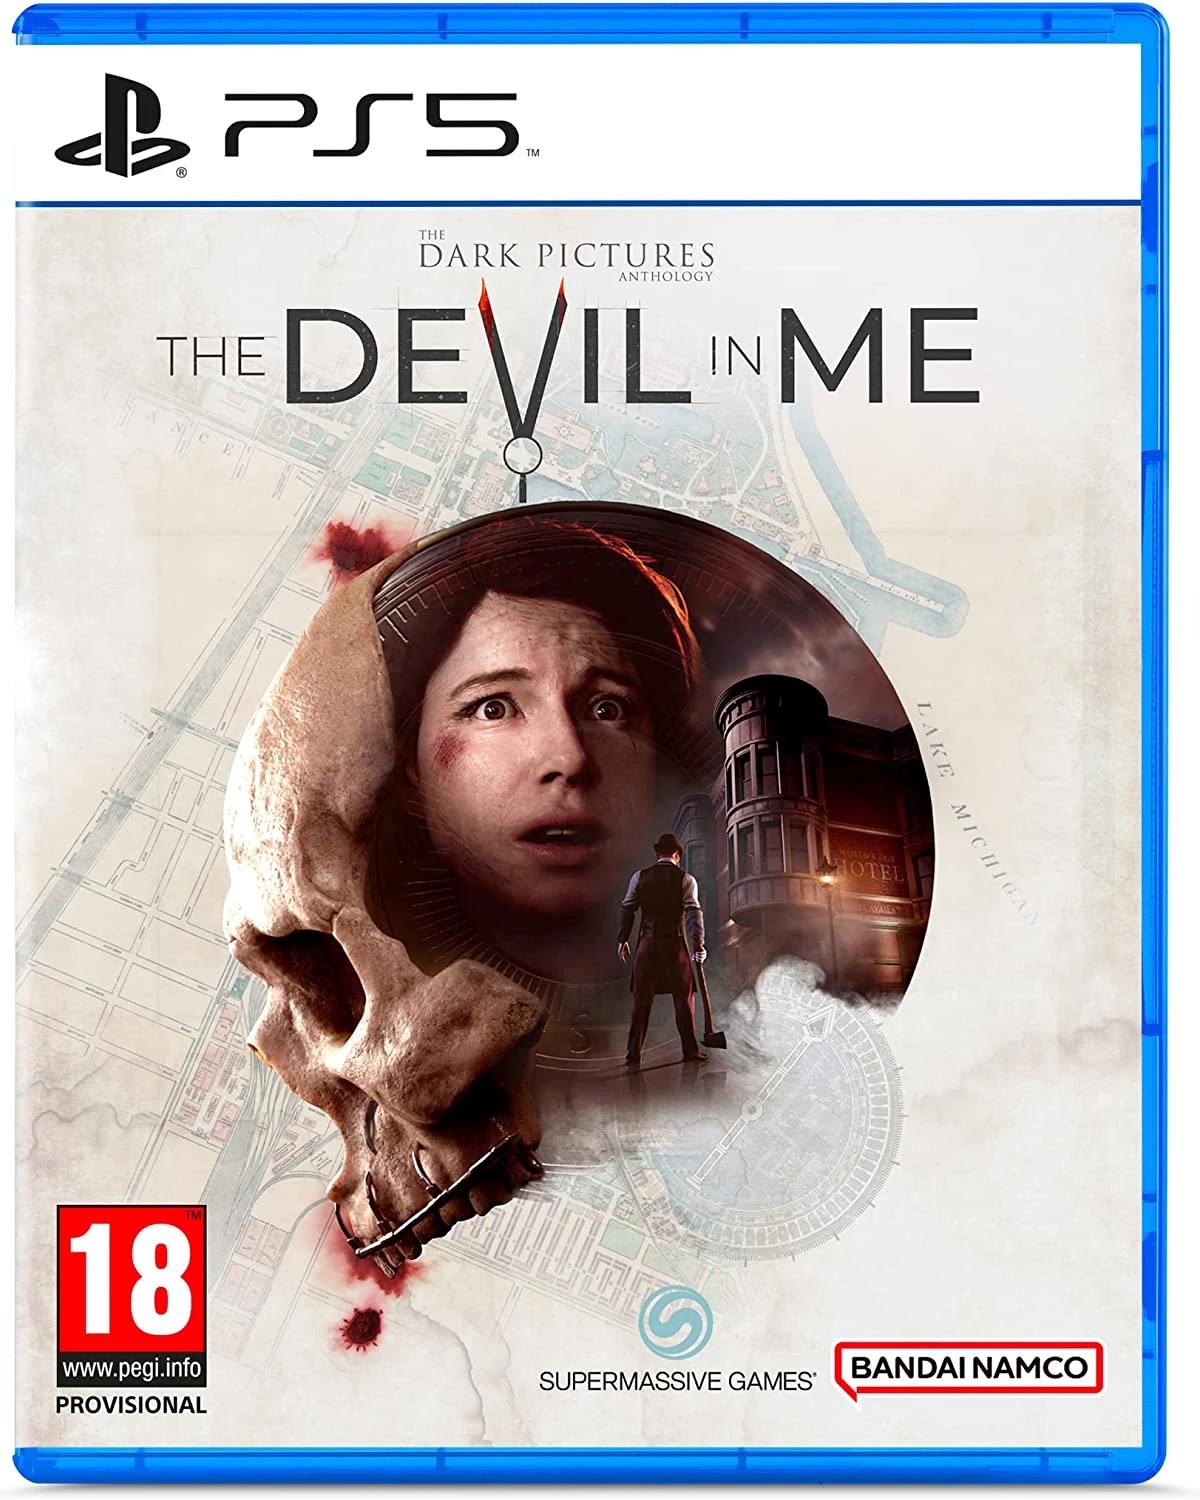 in　The　(輸入版)　Anthology:　Pictures　Dark　The　PS5　Devil　Me　YO!GAME